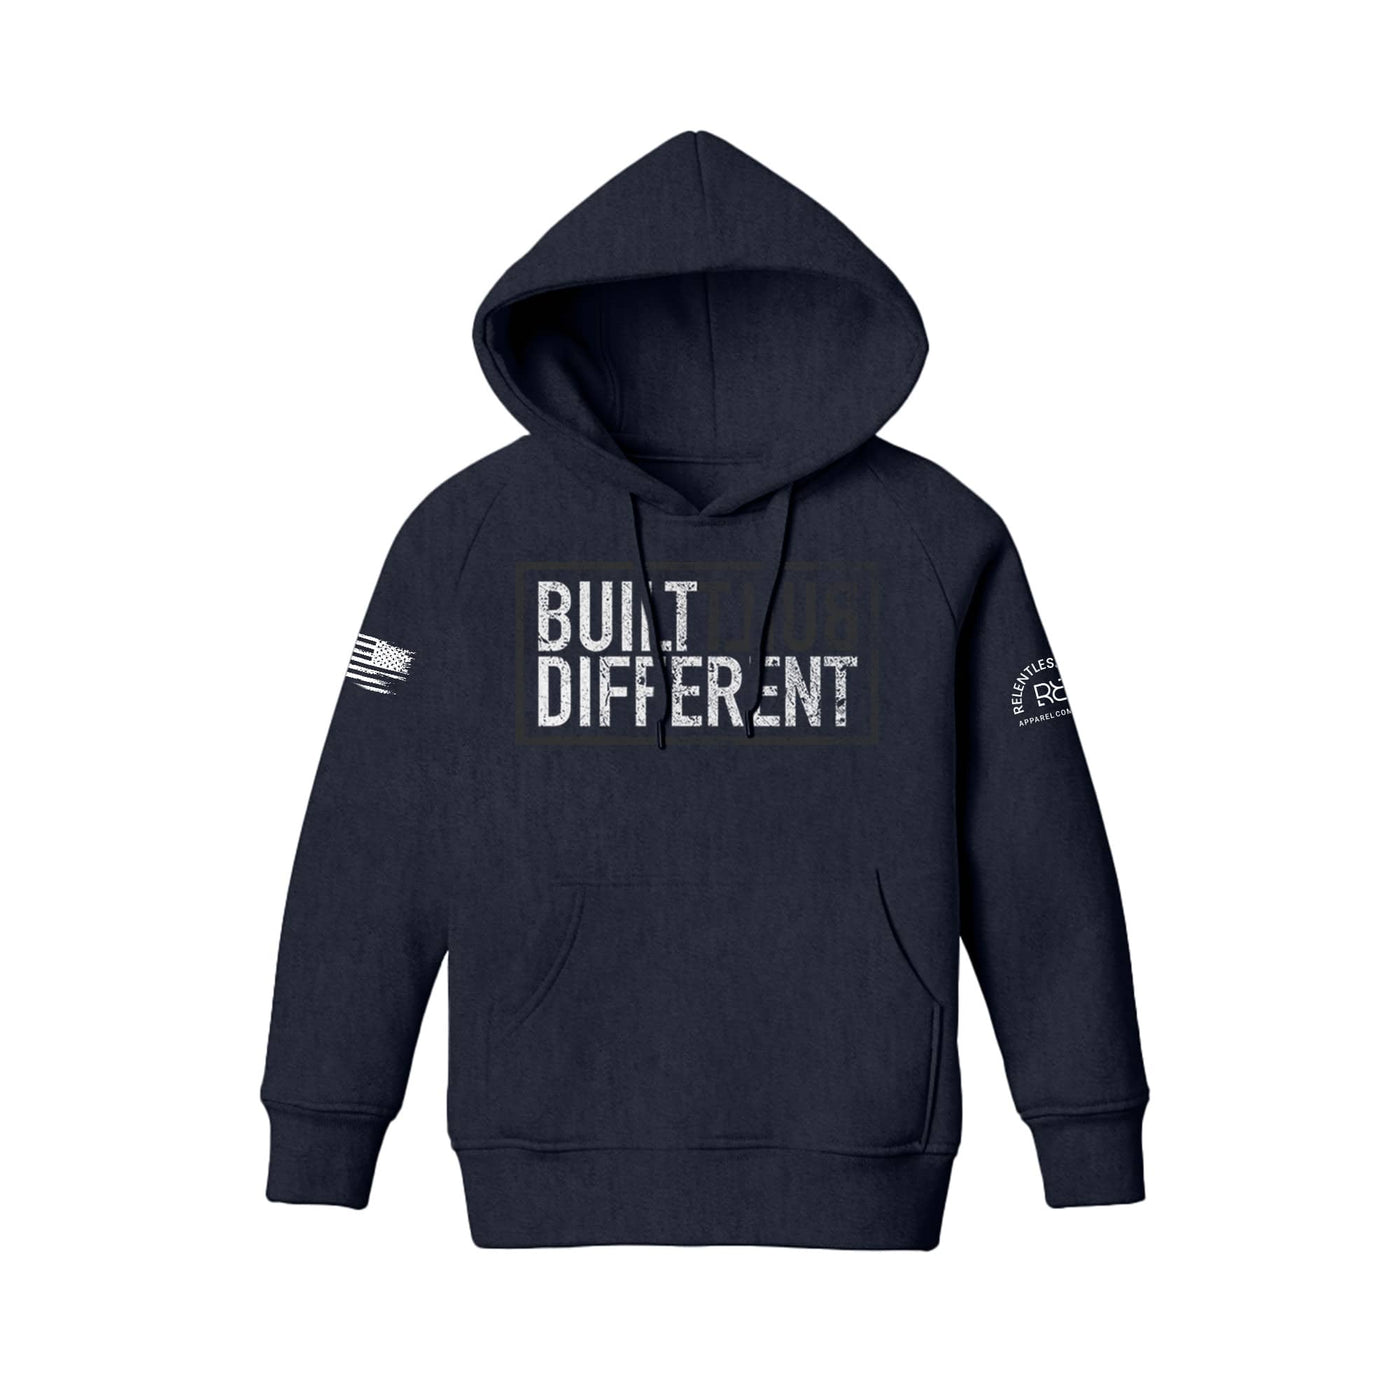 Built Different Youth front design navy hoodie